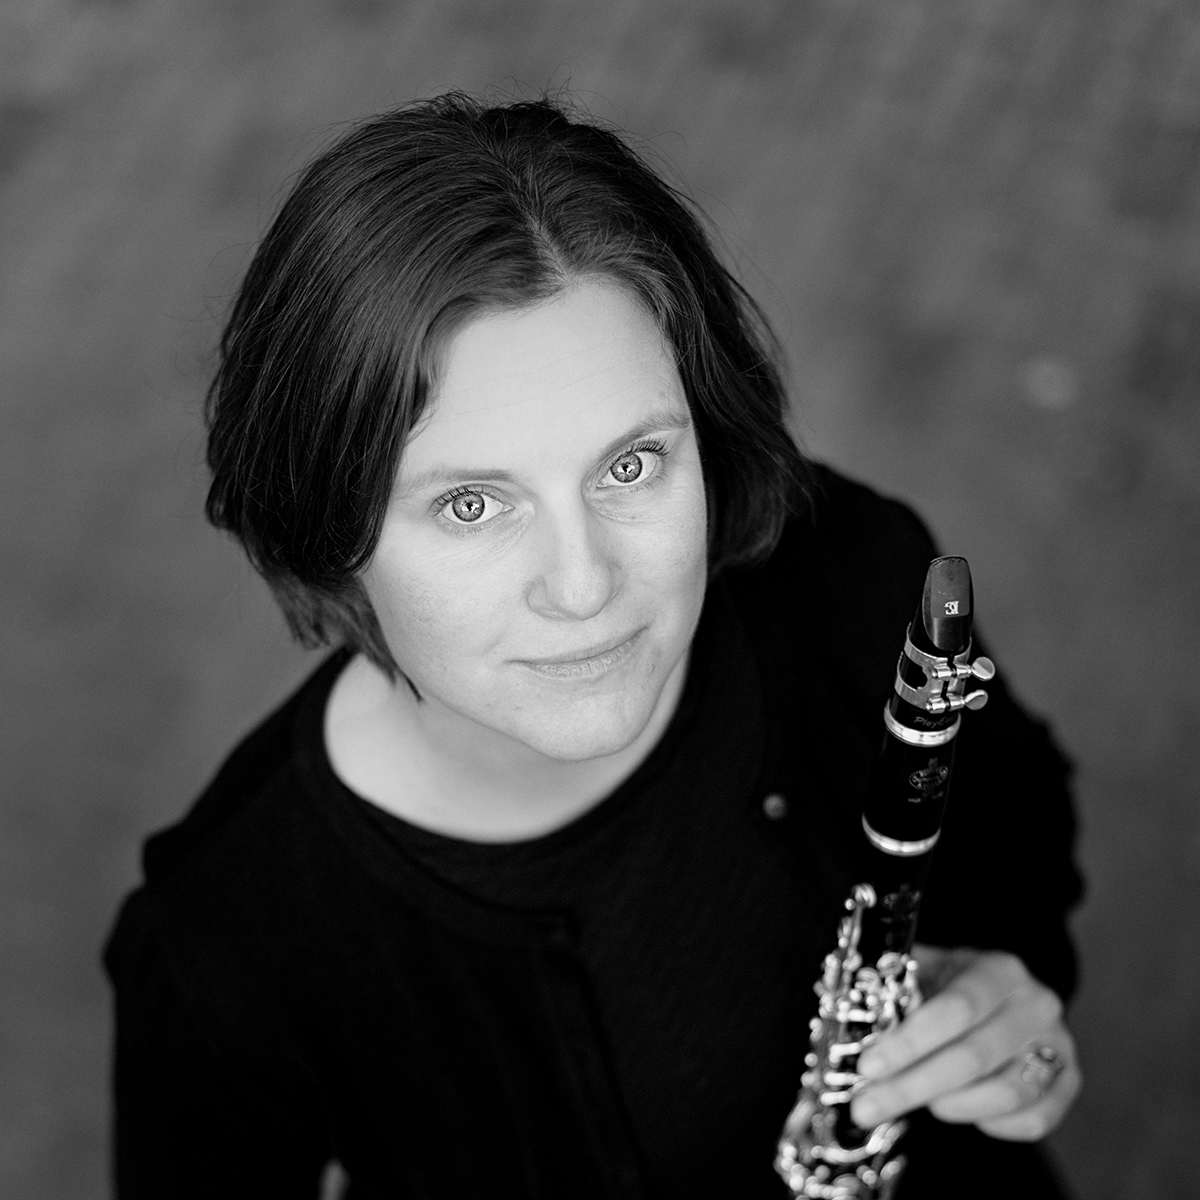 Judith plays the clarinet in the Klezmerorchester and immersed herself in the klezmer world many years ago. In her home town of Basel she organises regular meetings of the Open Klezmer Kapelye as well as KlezWeCan workshops.